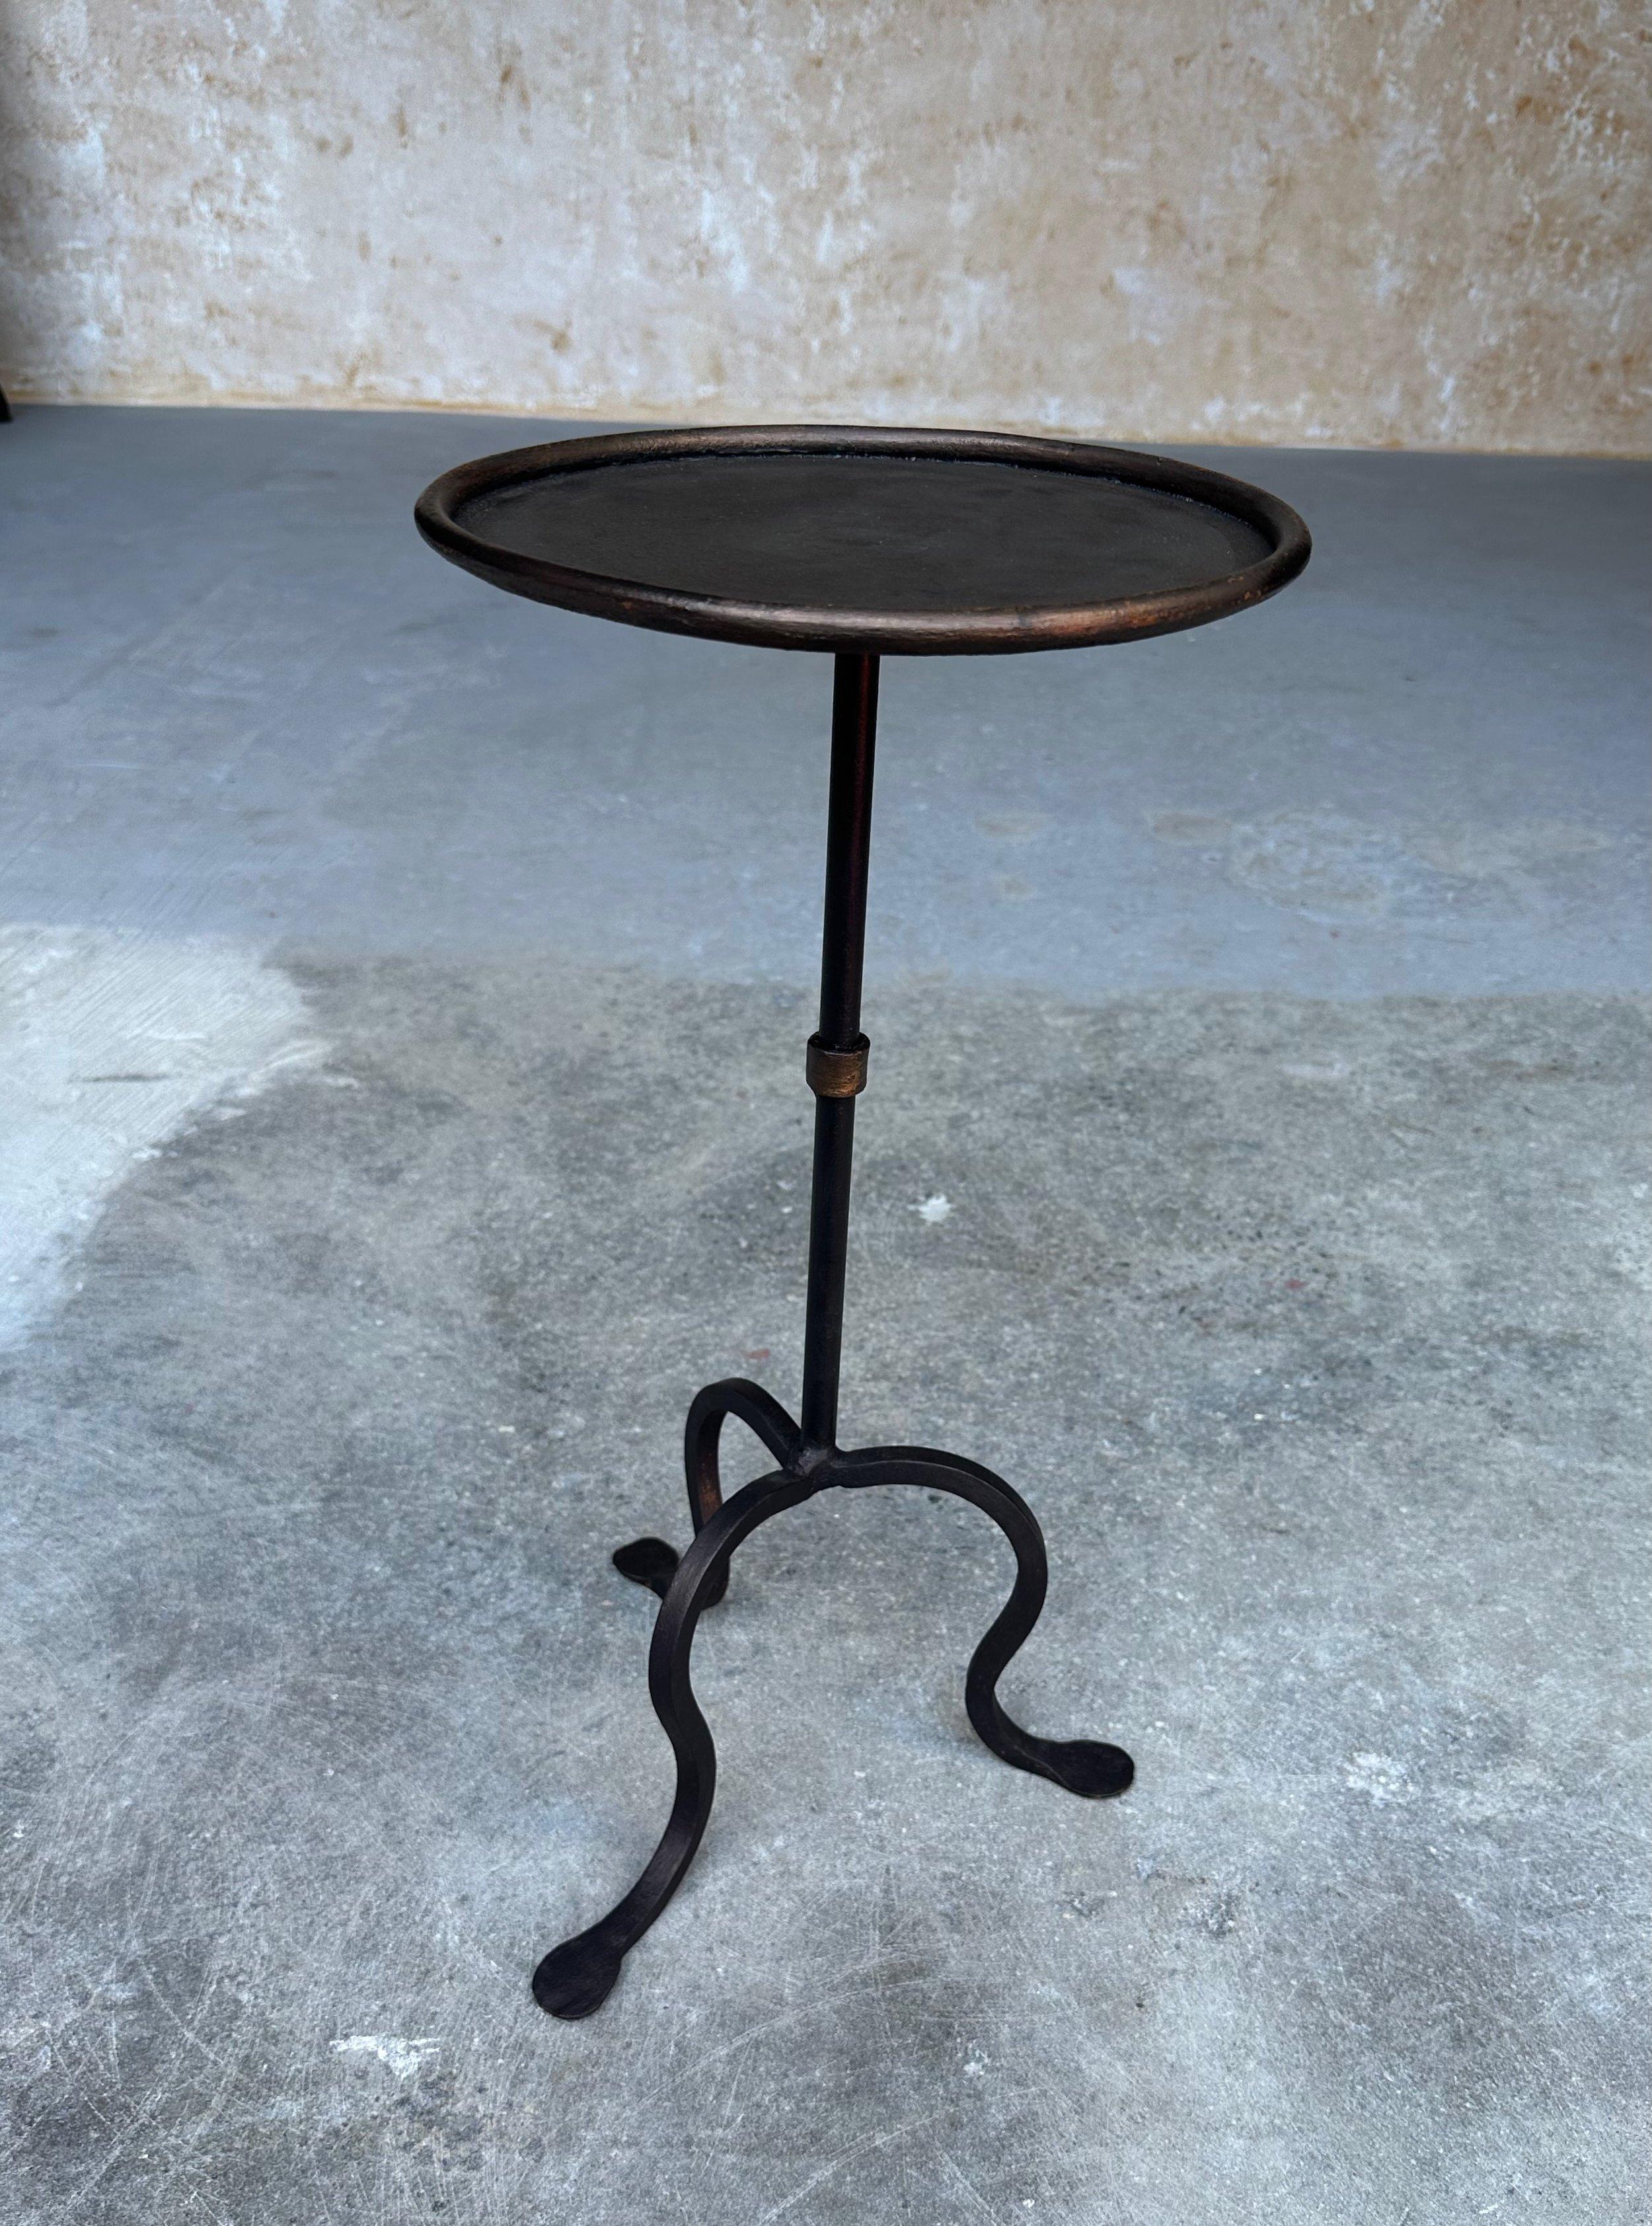 This lovely Spanish iron drinks table was recently crafted by European artisans using traditional iron-working techniques. Based on one of our favorite vintage designs, it features a hand-applied black finish with subtle gold accents around the